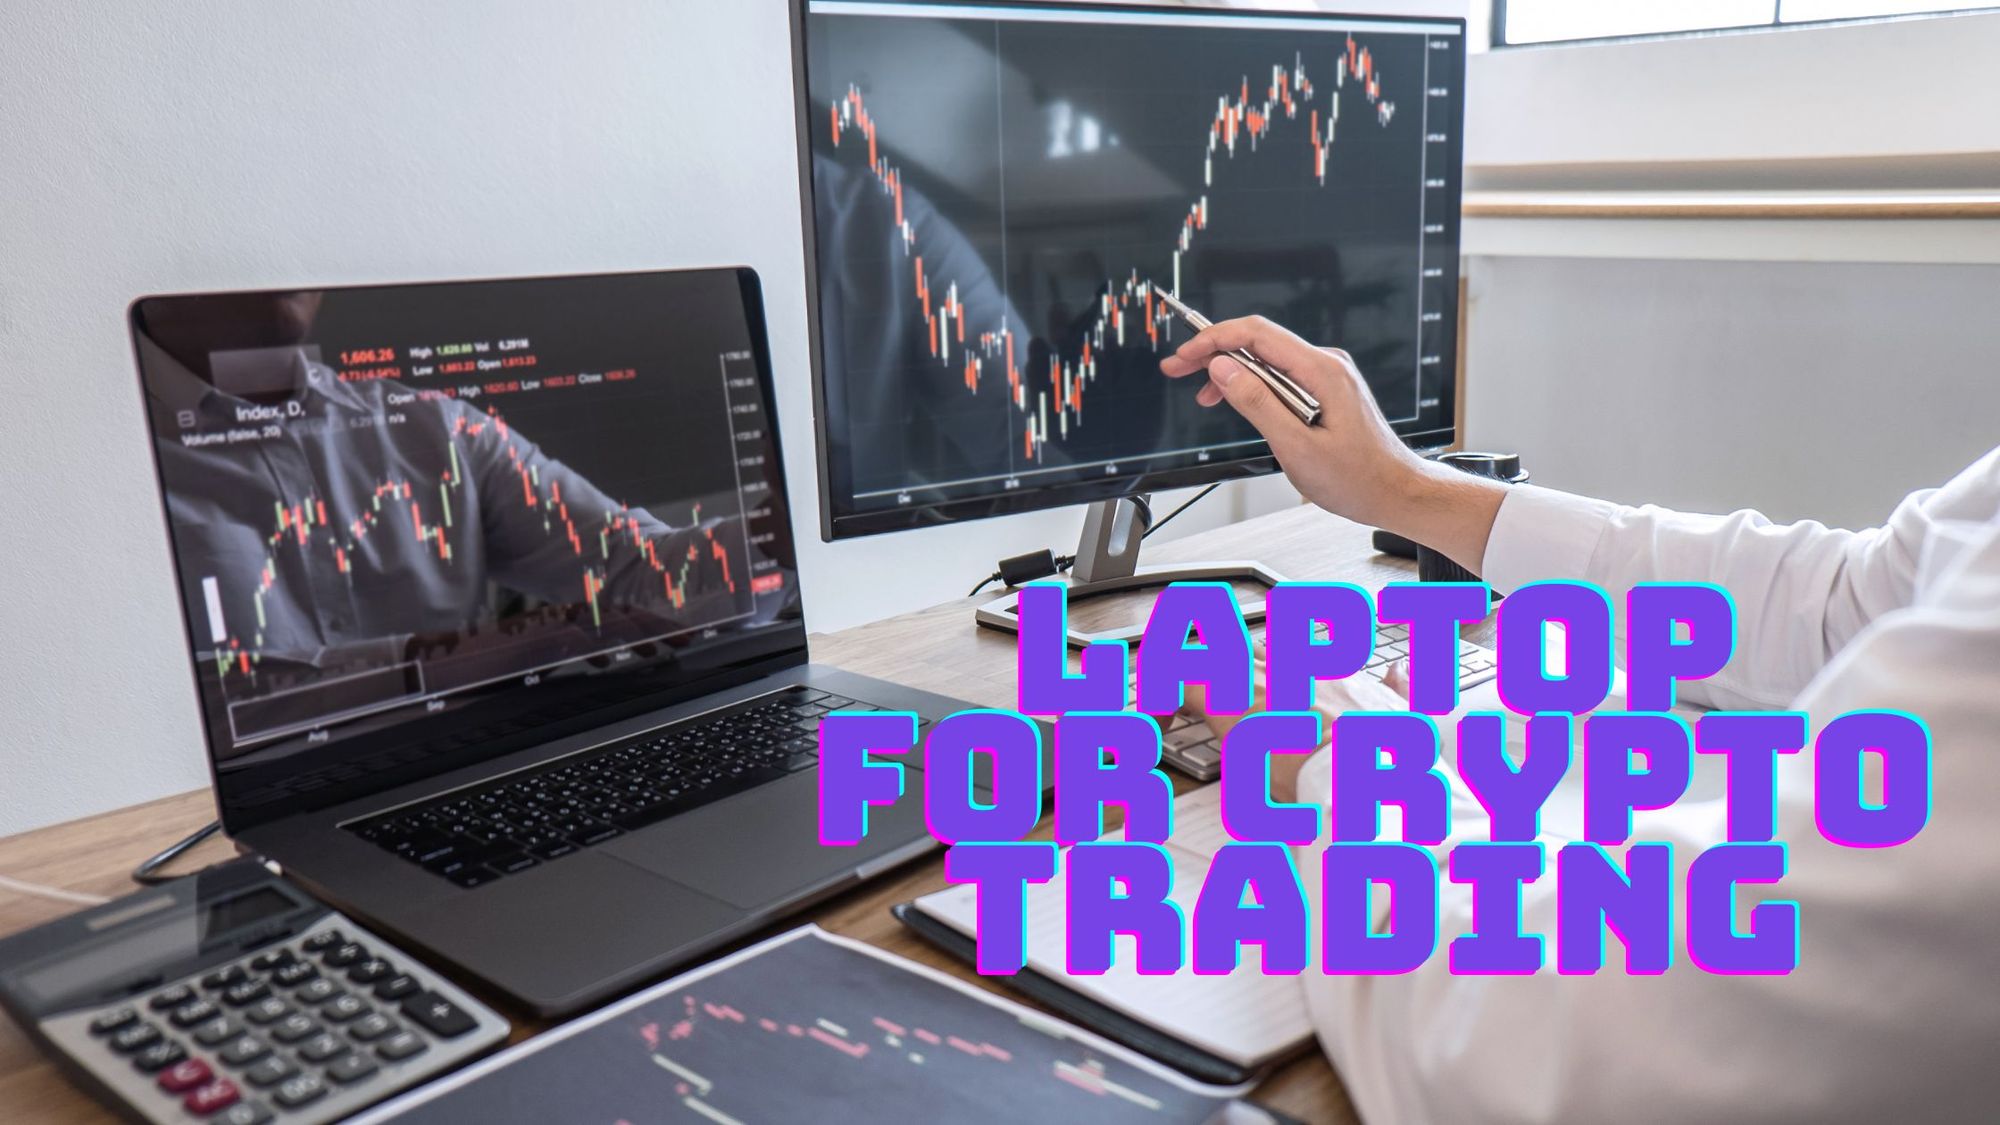 A man trading cryptocurrency on his laptop, the words "laptop for crypto trading" are displayed.